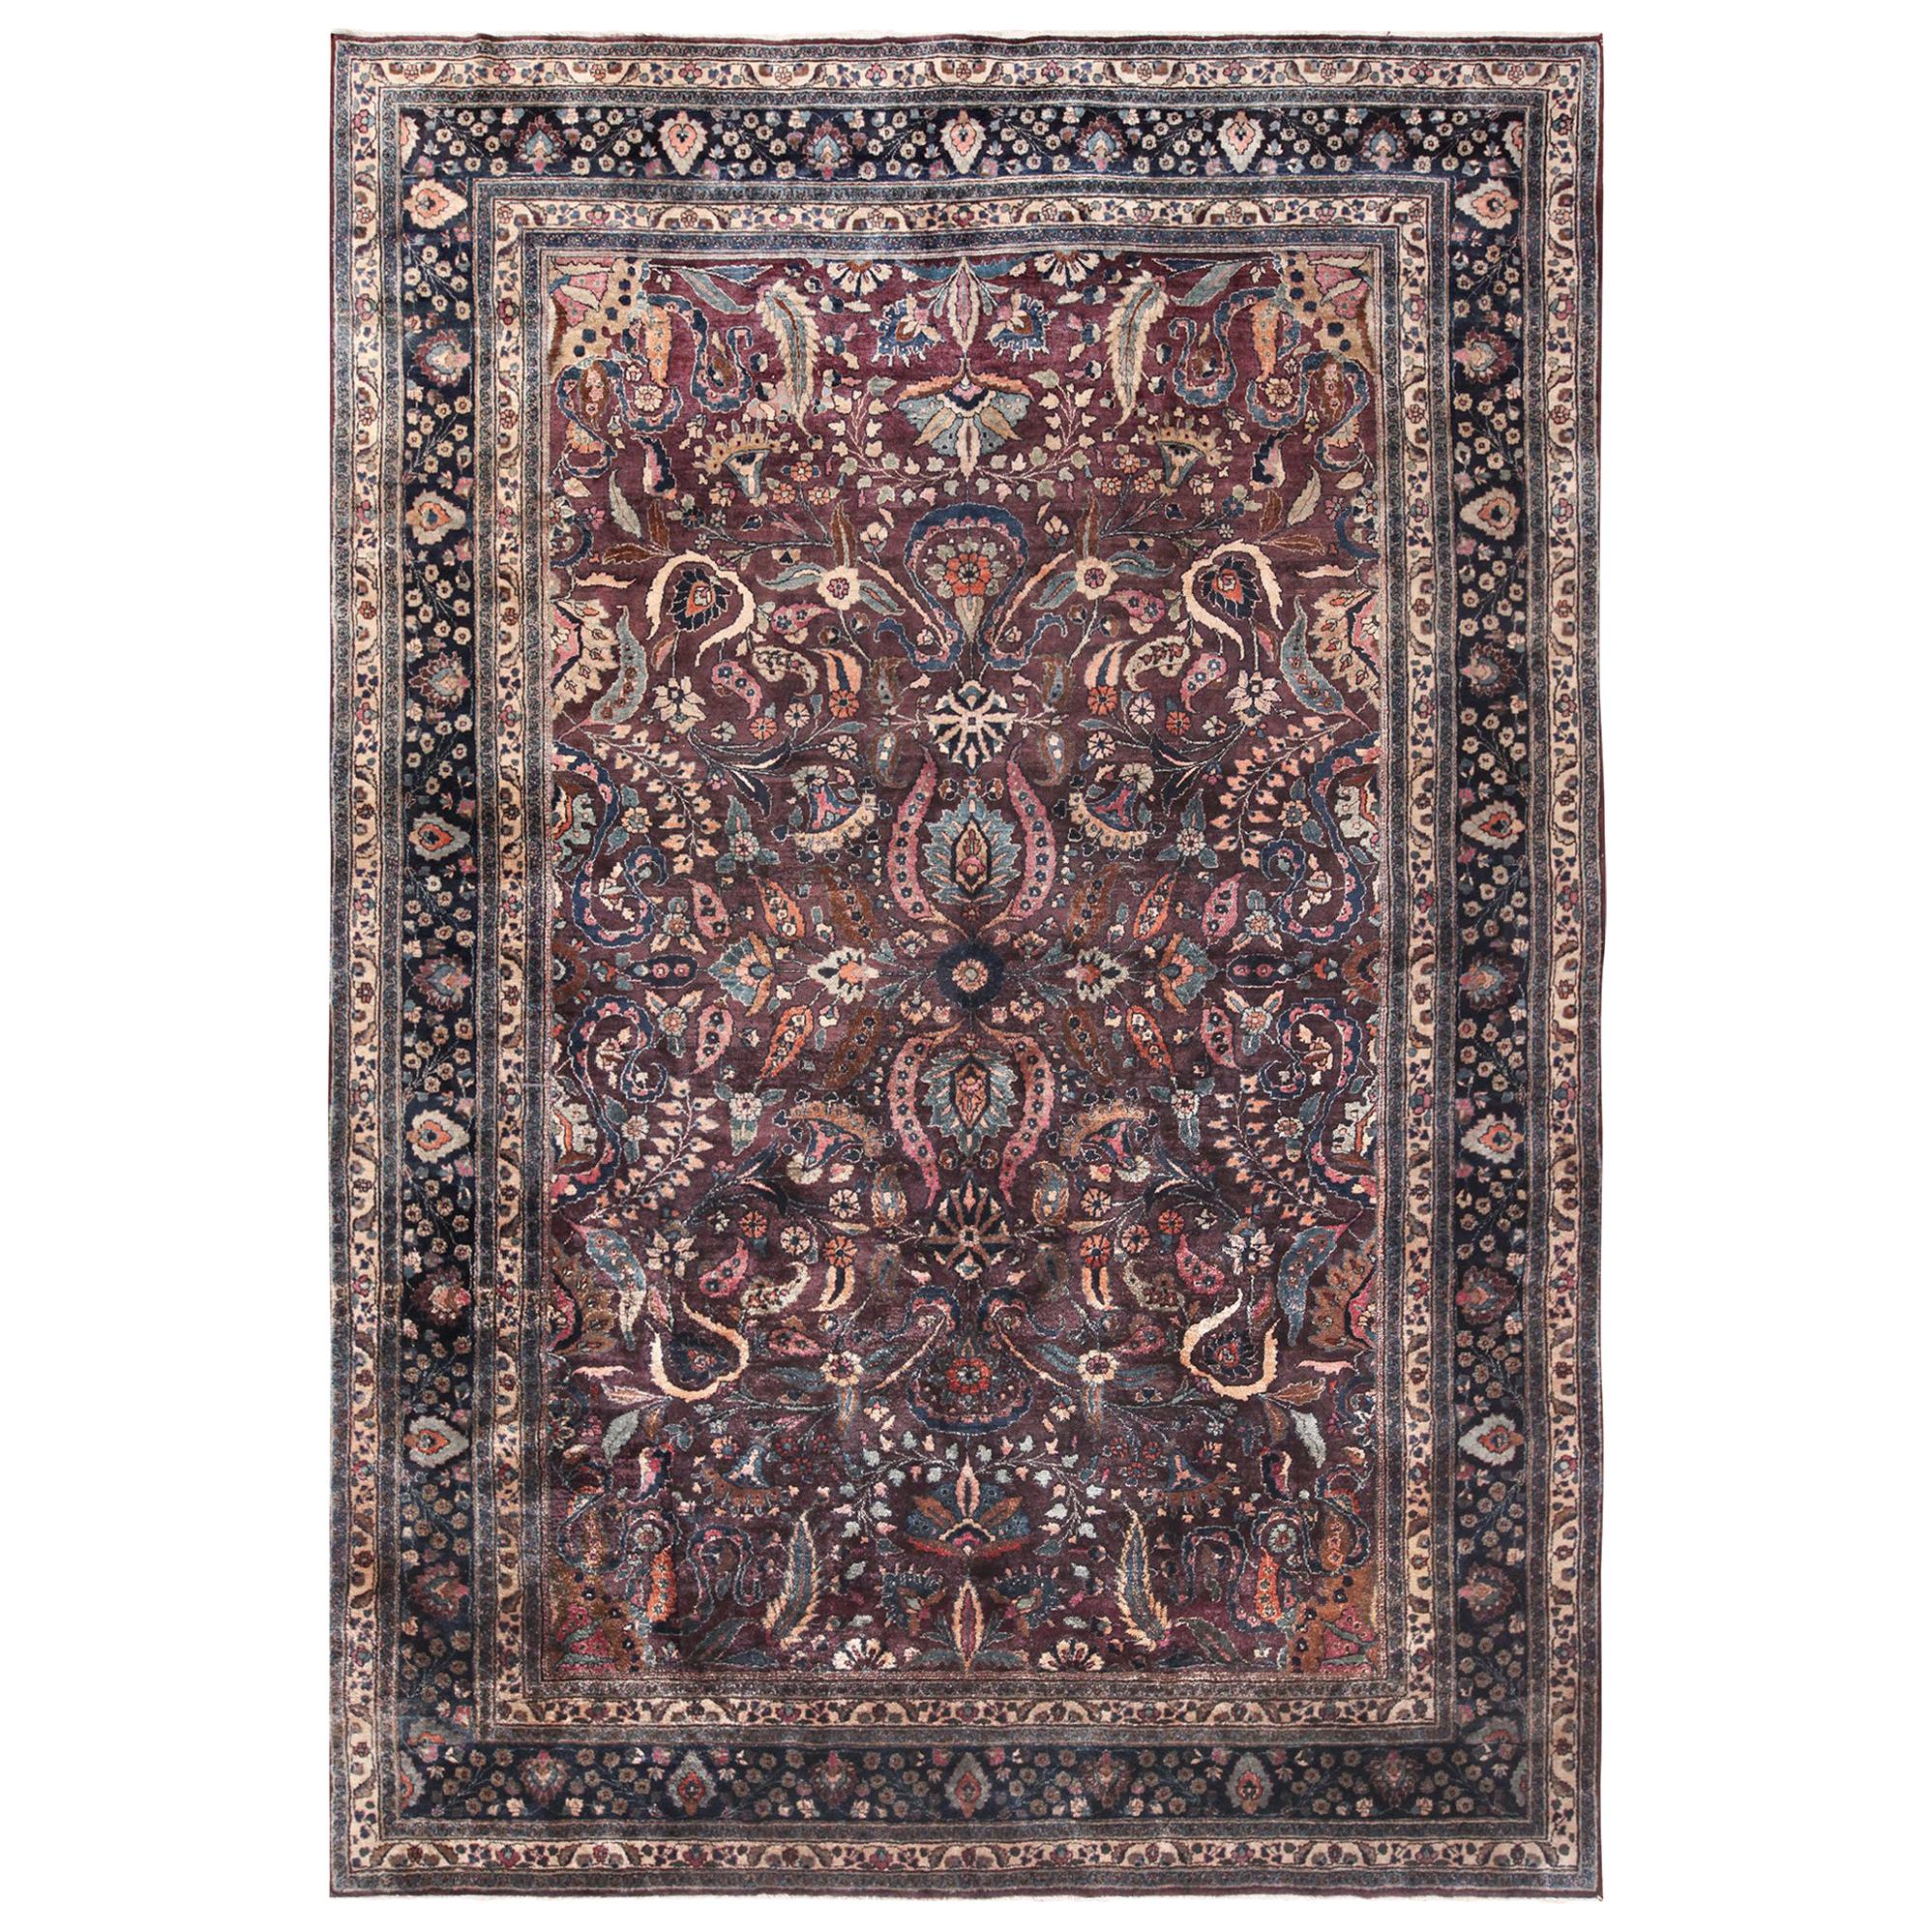 Antique Persian Khorassan Rug. Size: 10' x 14' 7"  For Sale